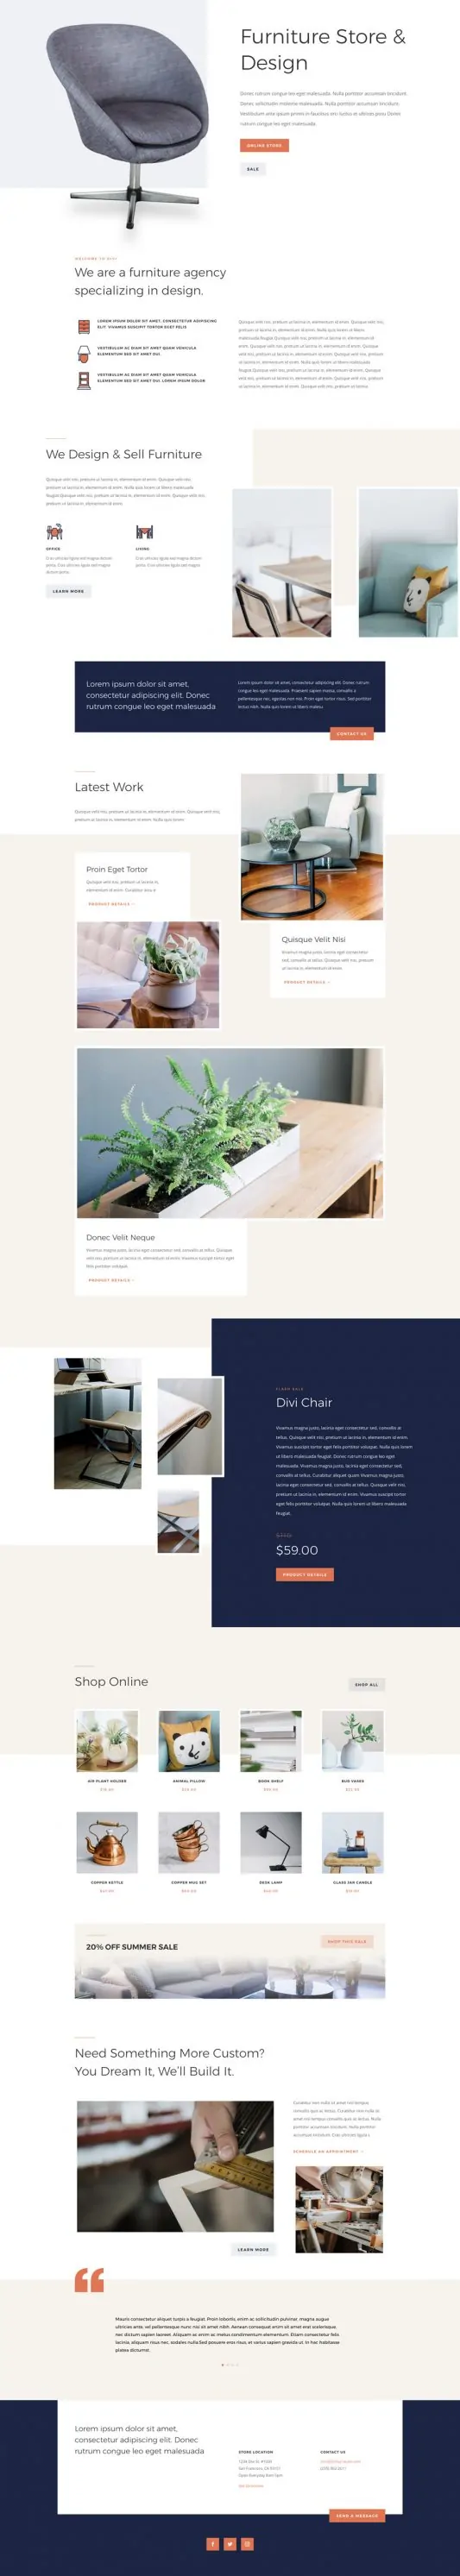 Furniture Store Landing Page Style 1